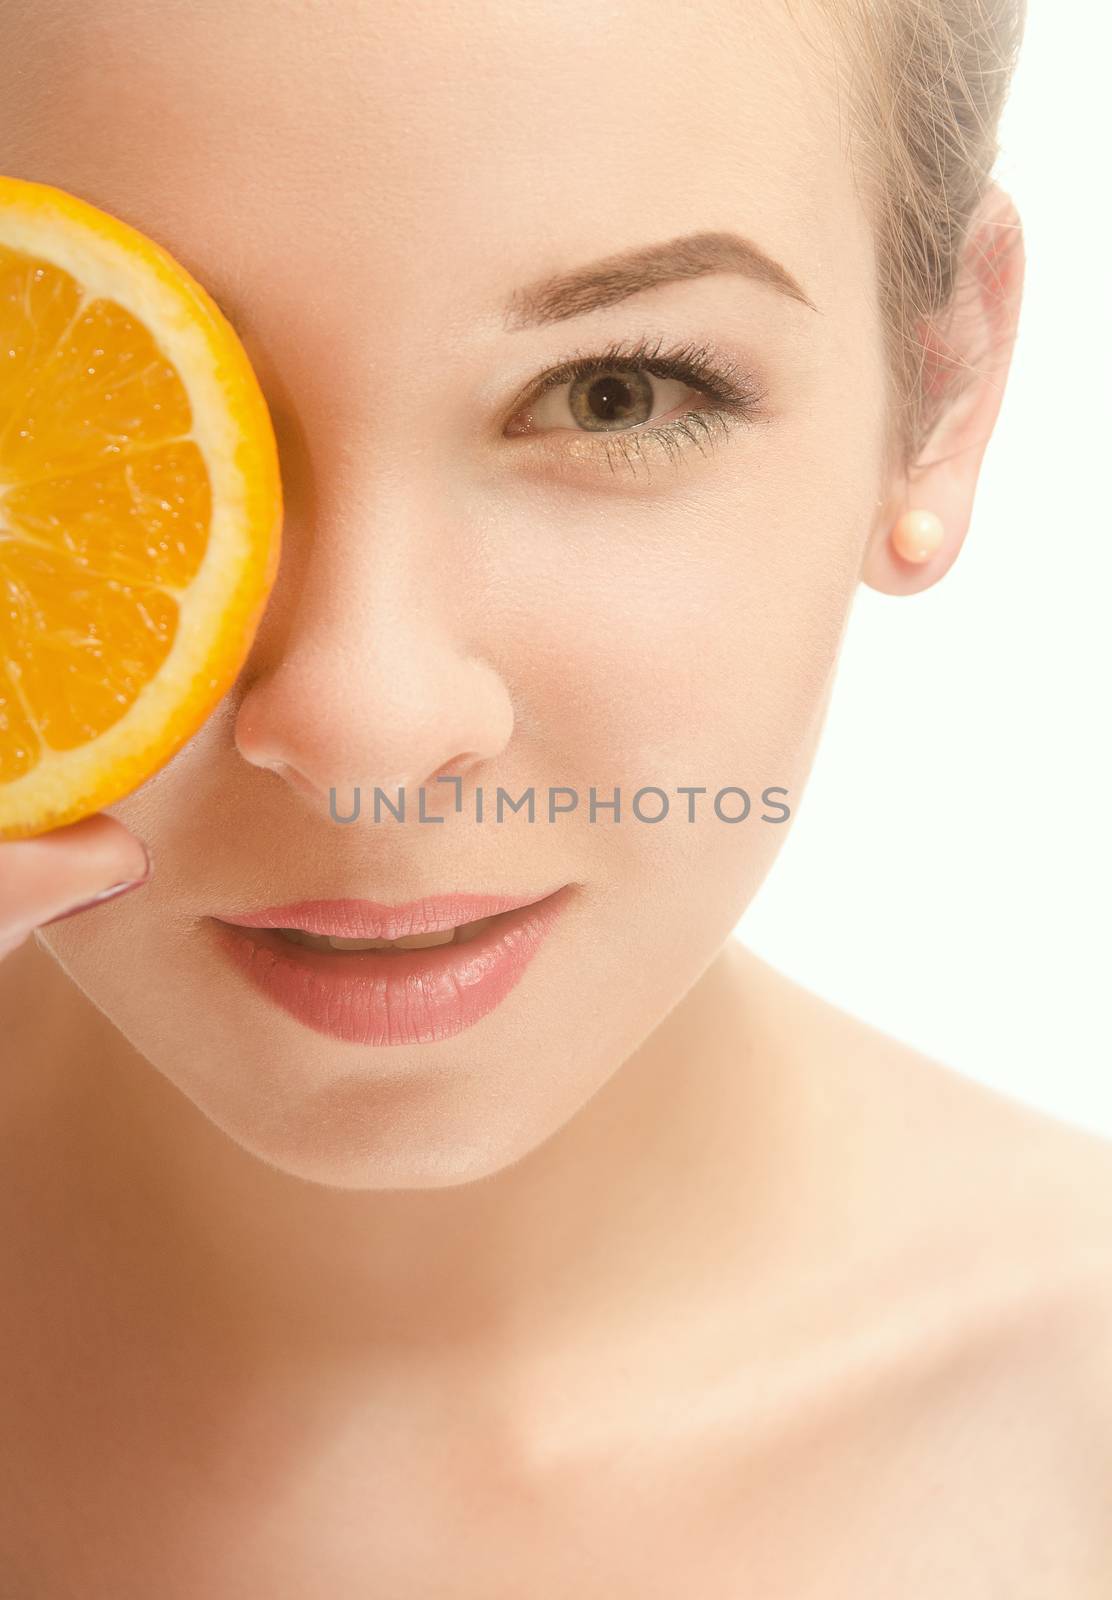 Face of a beautiful young woman who is holding a half of orange slices in front of his eyes and smiling. White background